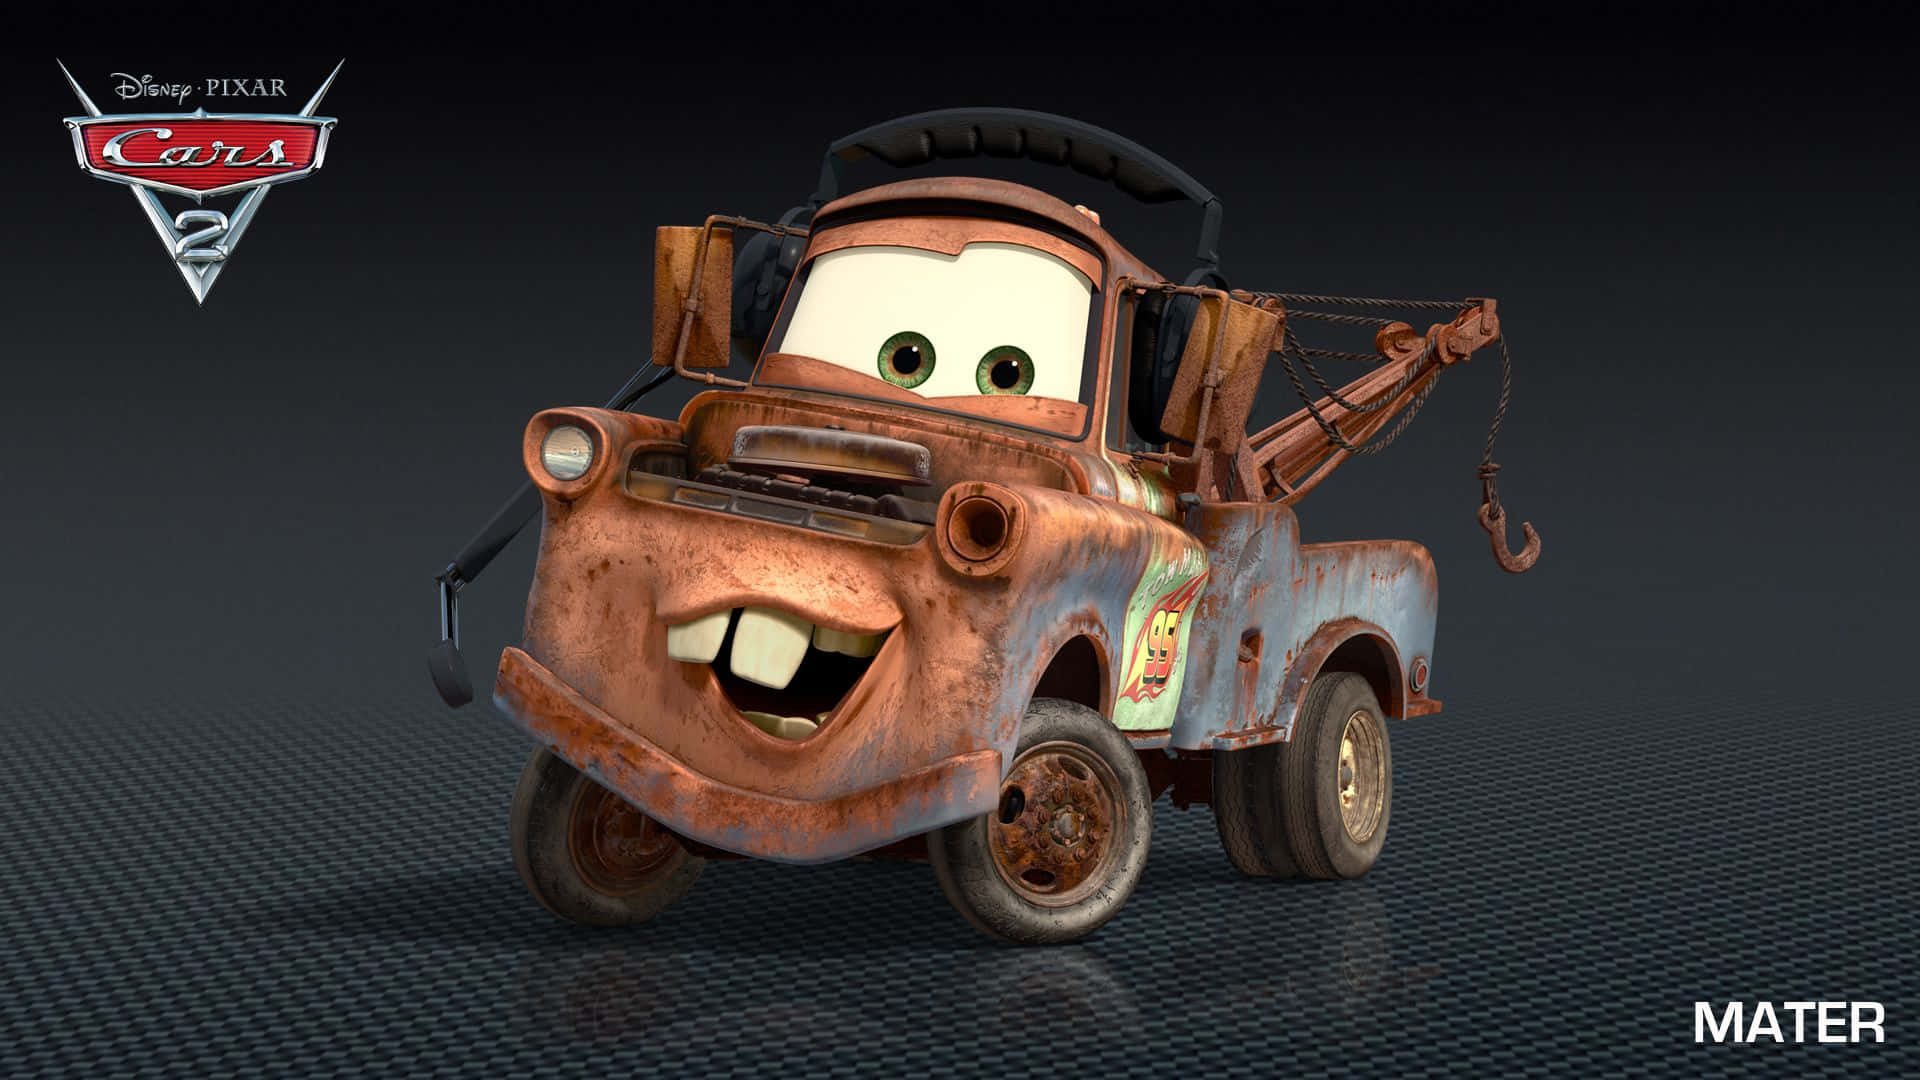 McQueen, Mater and Finn drive across multiple countries in their exciting journey searching for a spy.